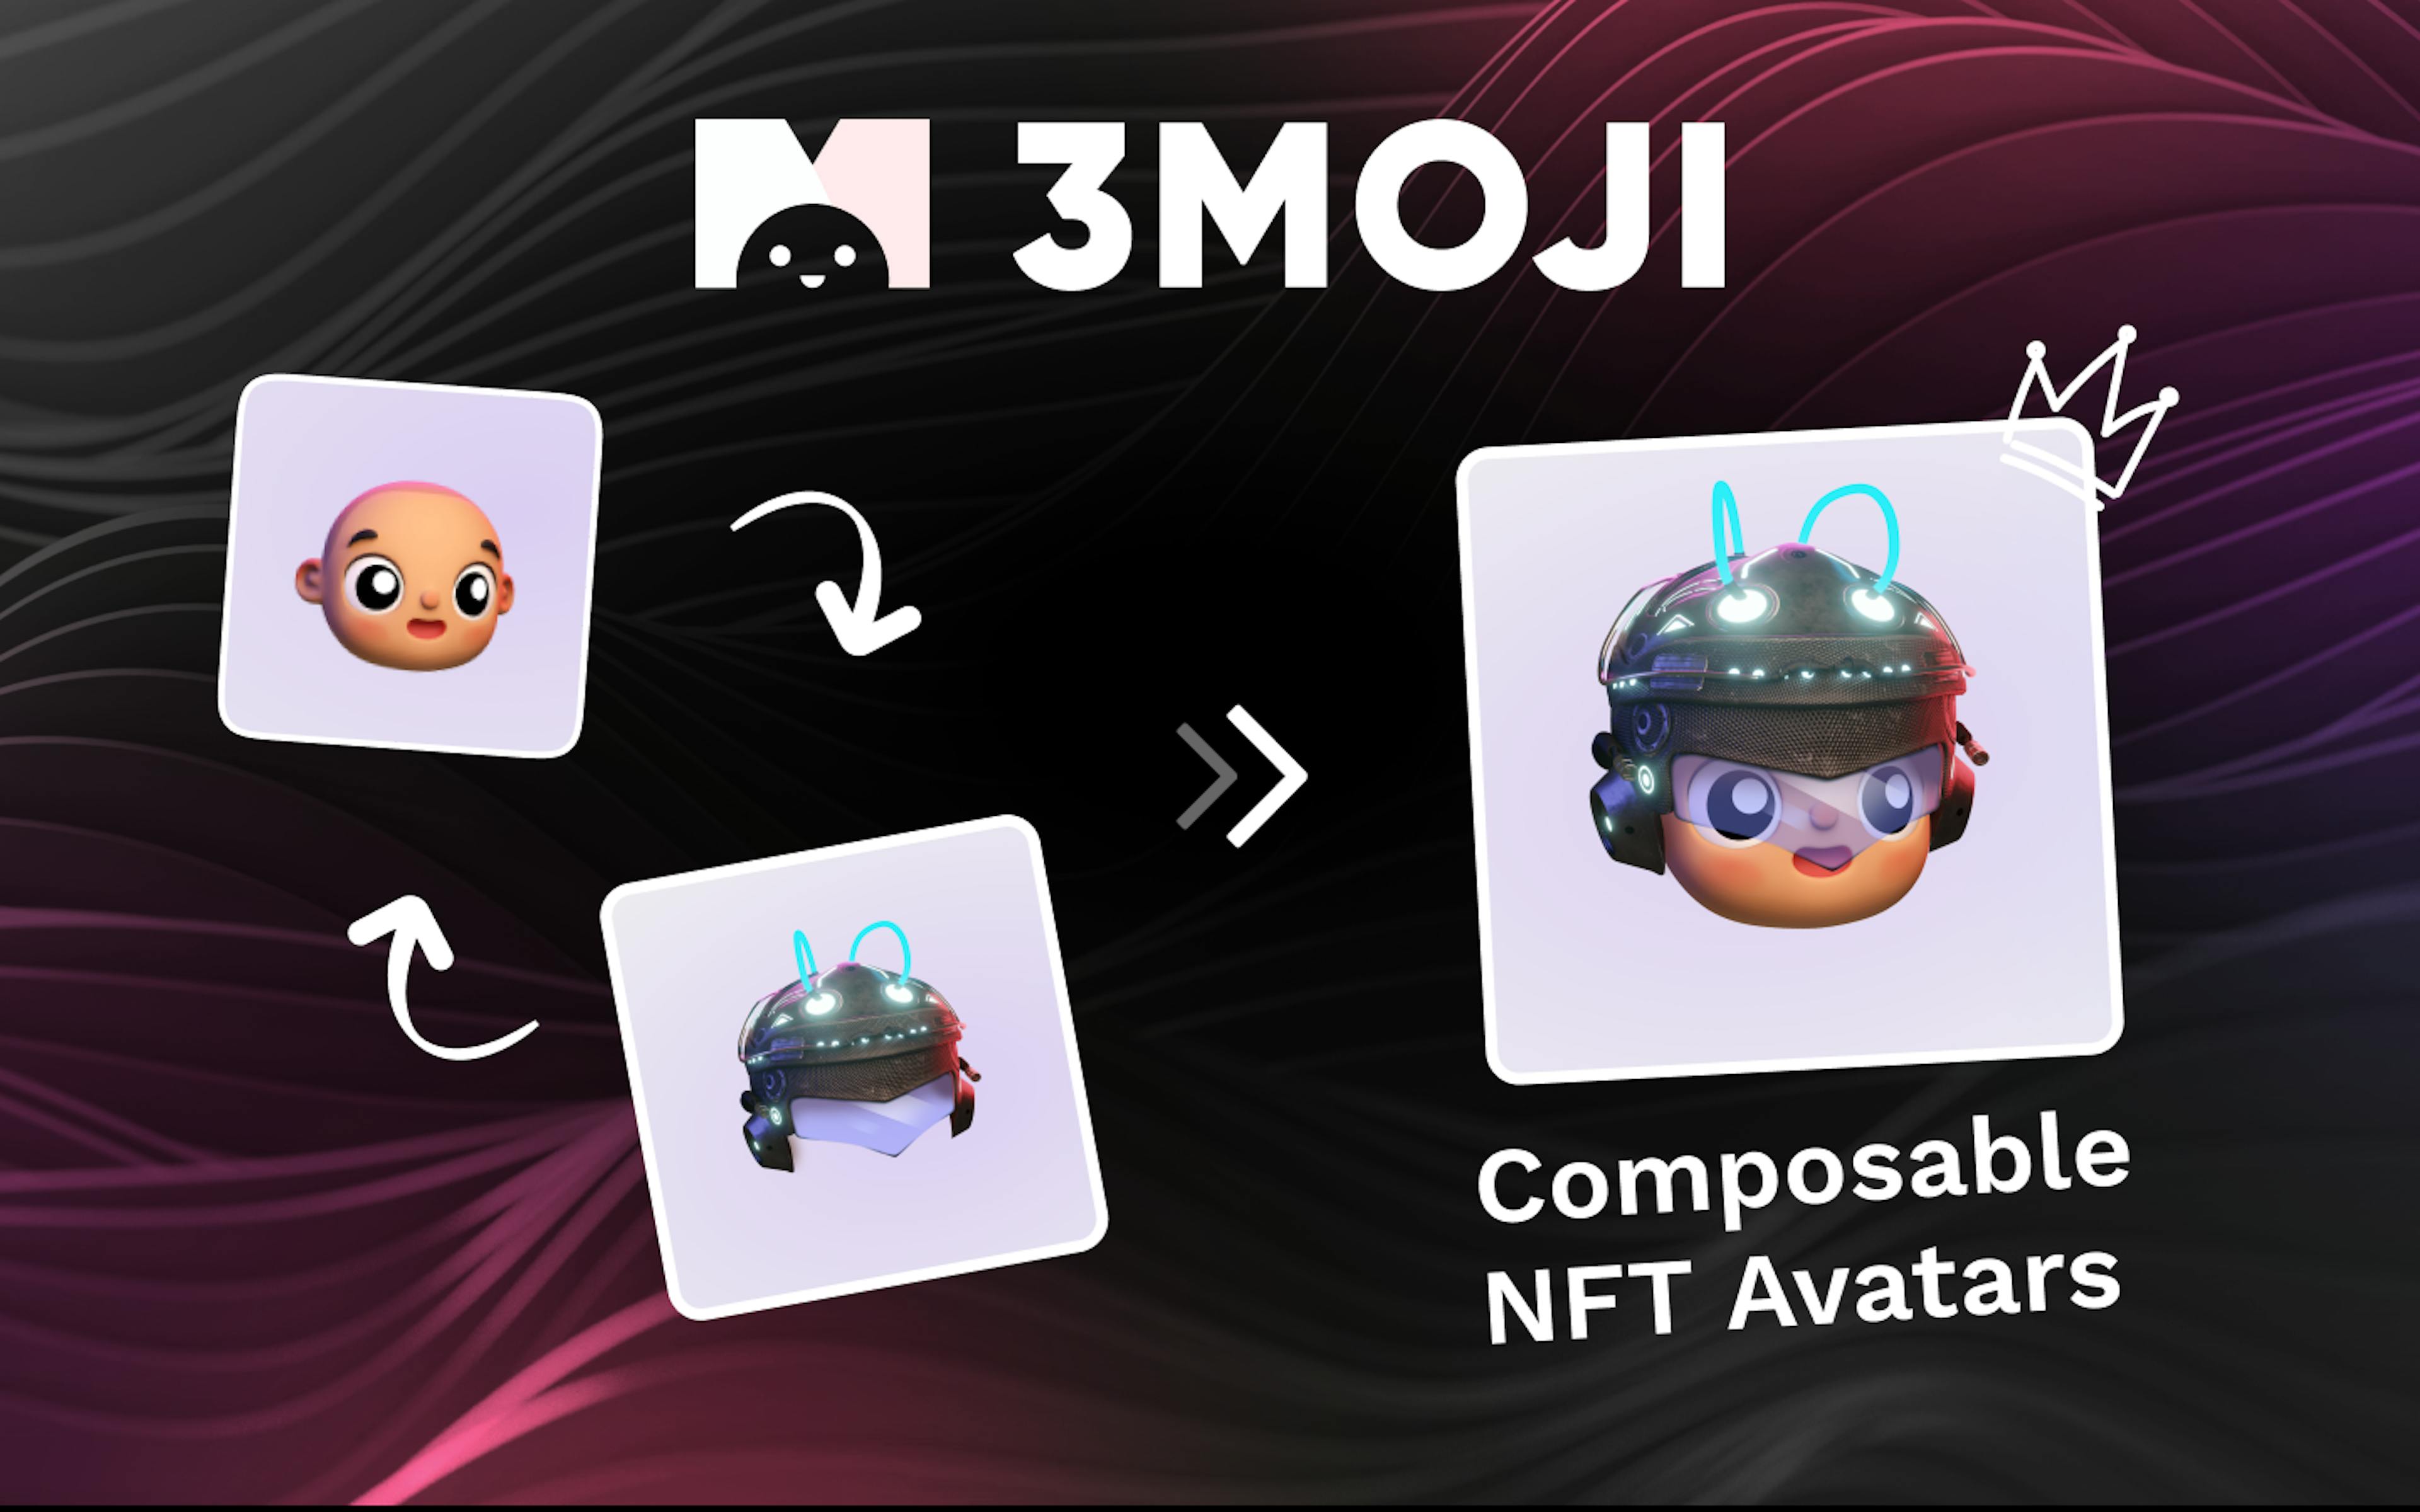 3moji NFTs are composable and upgradeable